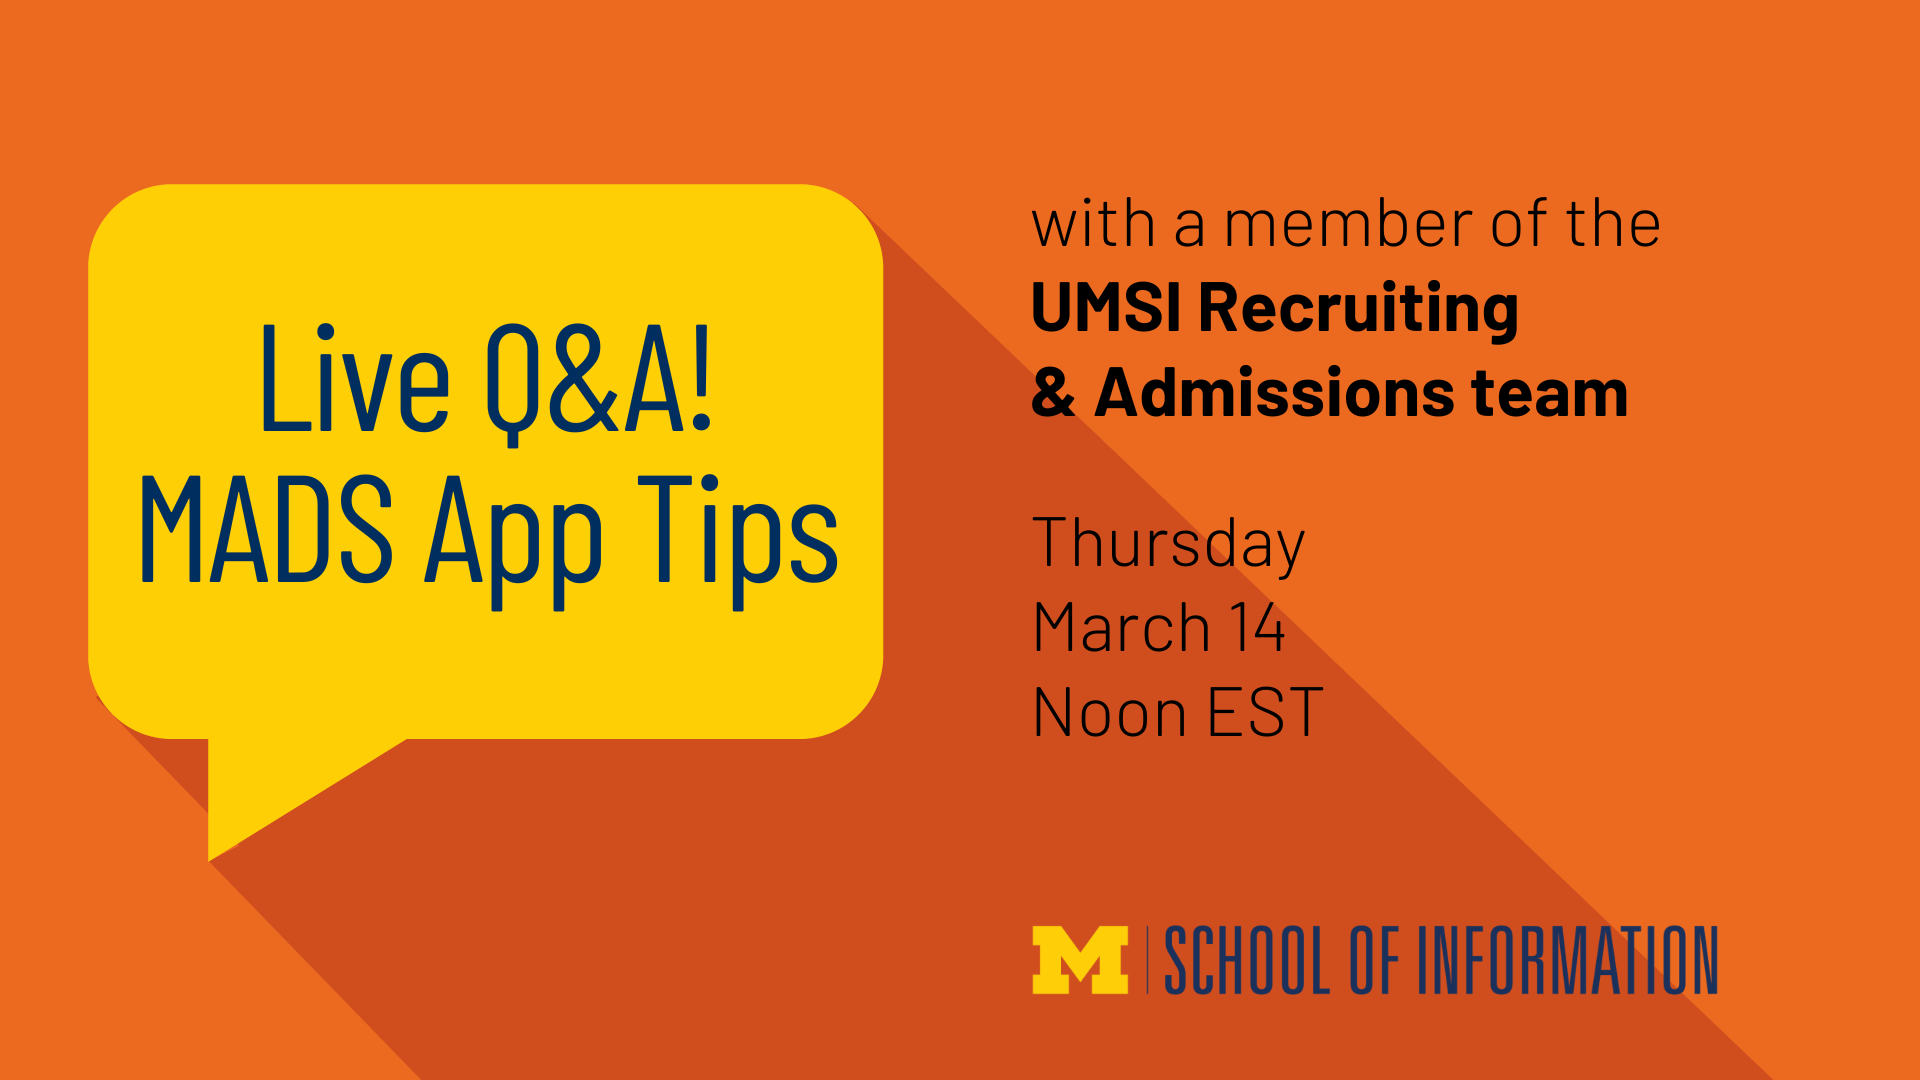 "Live Q&A! MADS App Tips with a member of the UMSI Recruiting & Admissions team. Thursday March 14. Noon EST. School of Information."